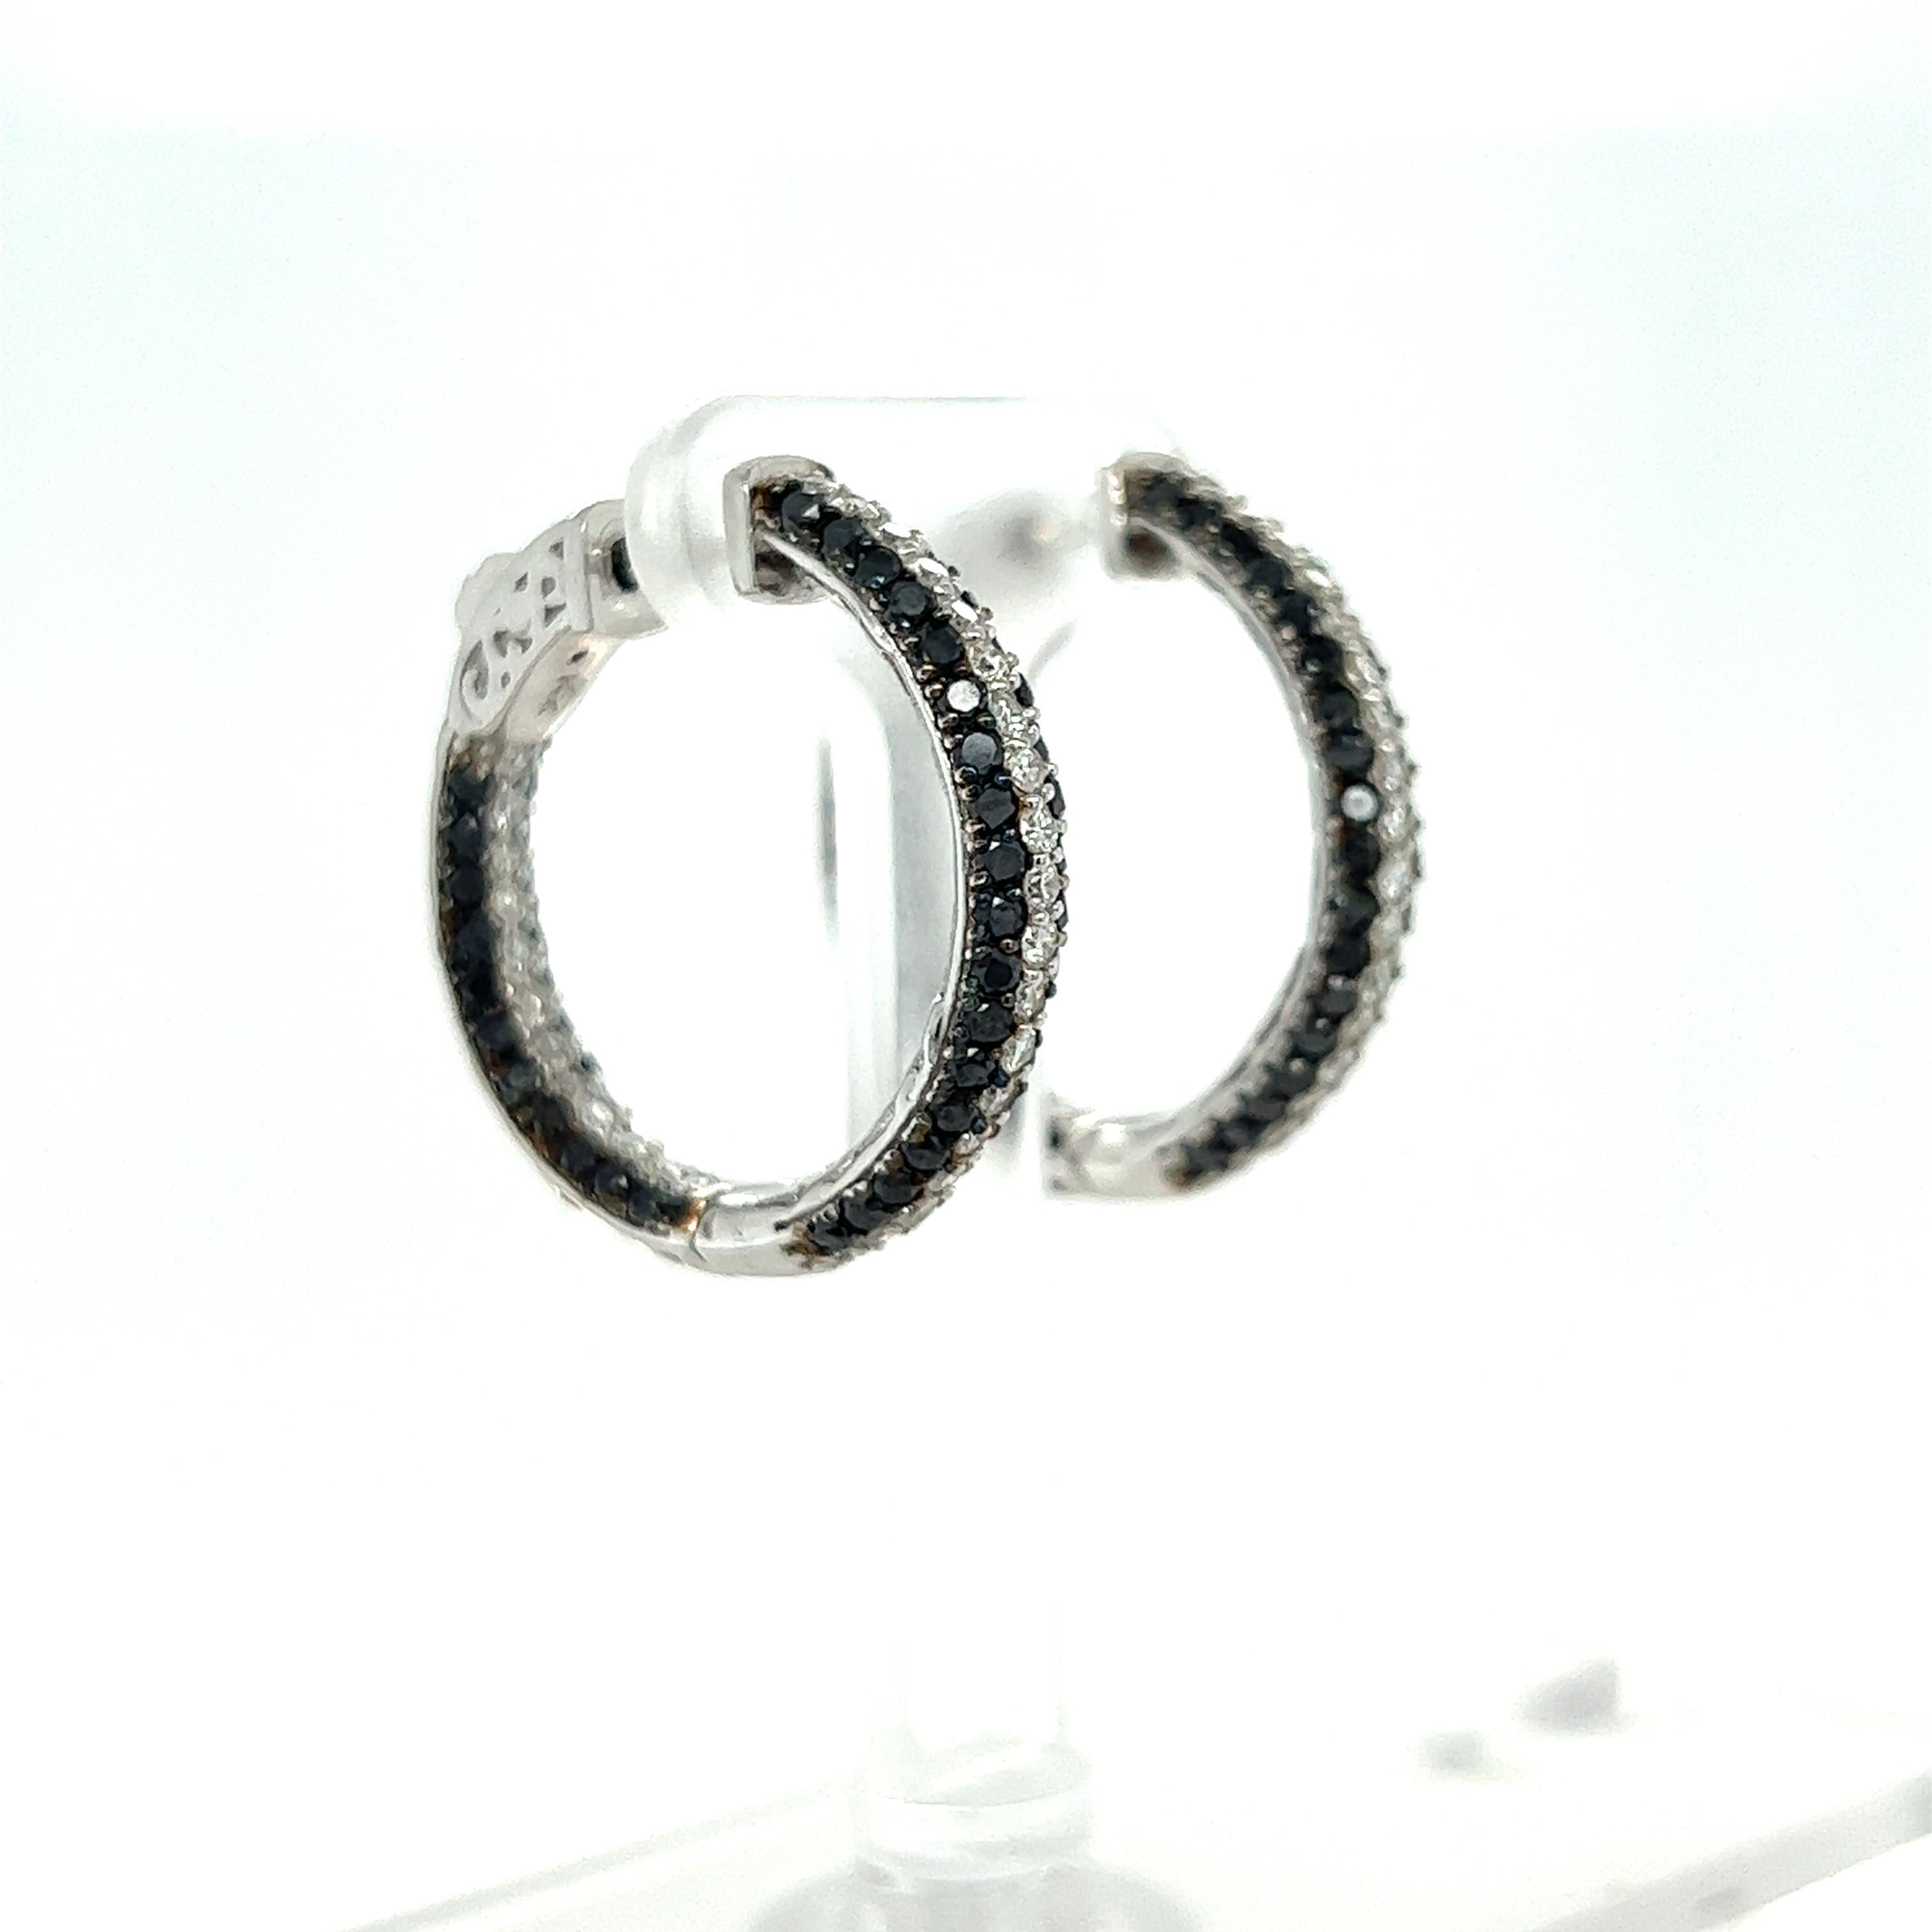 These hoop earrings have Round Cut Black Diamonds that weigh 1.89 Carats and Round Cut White Diamonds that weigh 0.86 Carats. The total carat weight of the earrings are 2.75 Carats. 

Curated in 14 Karat White Gold they weigh approximately 8.9